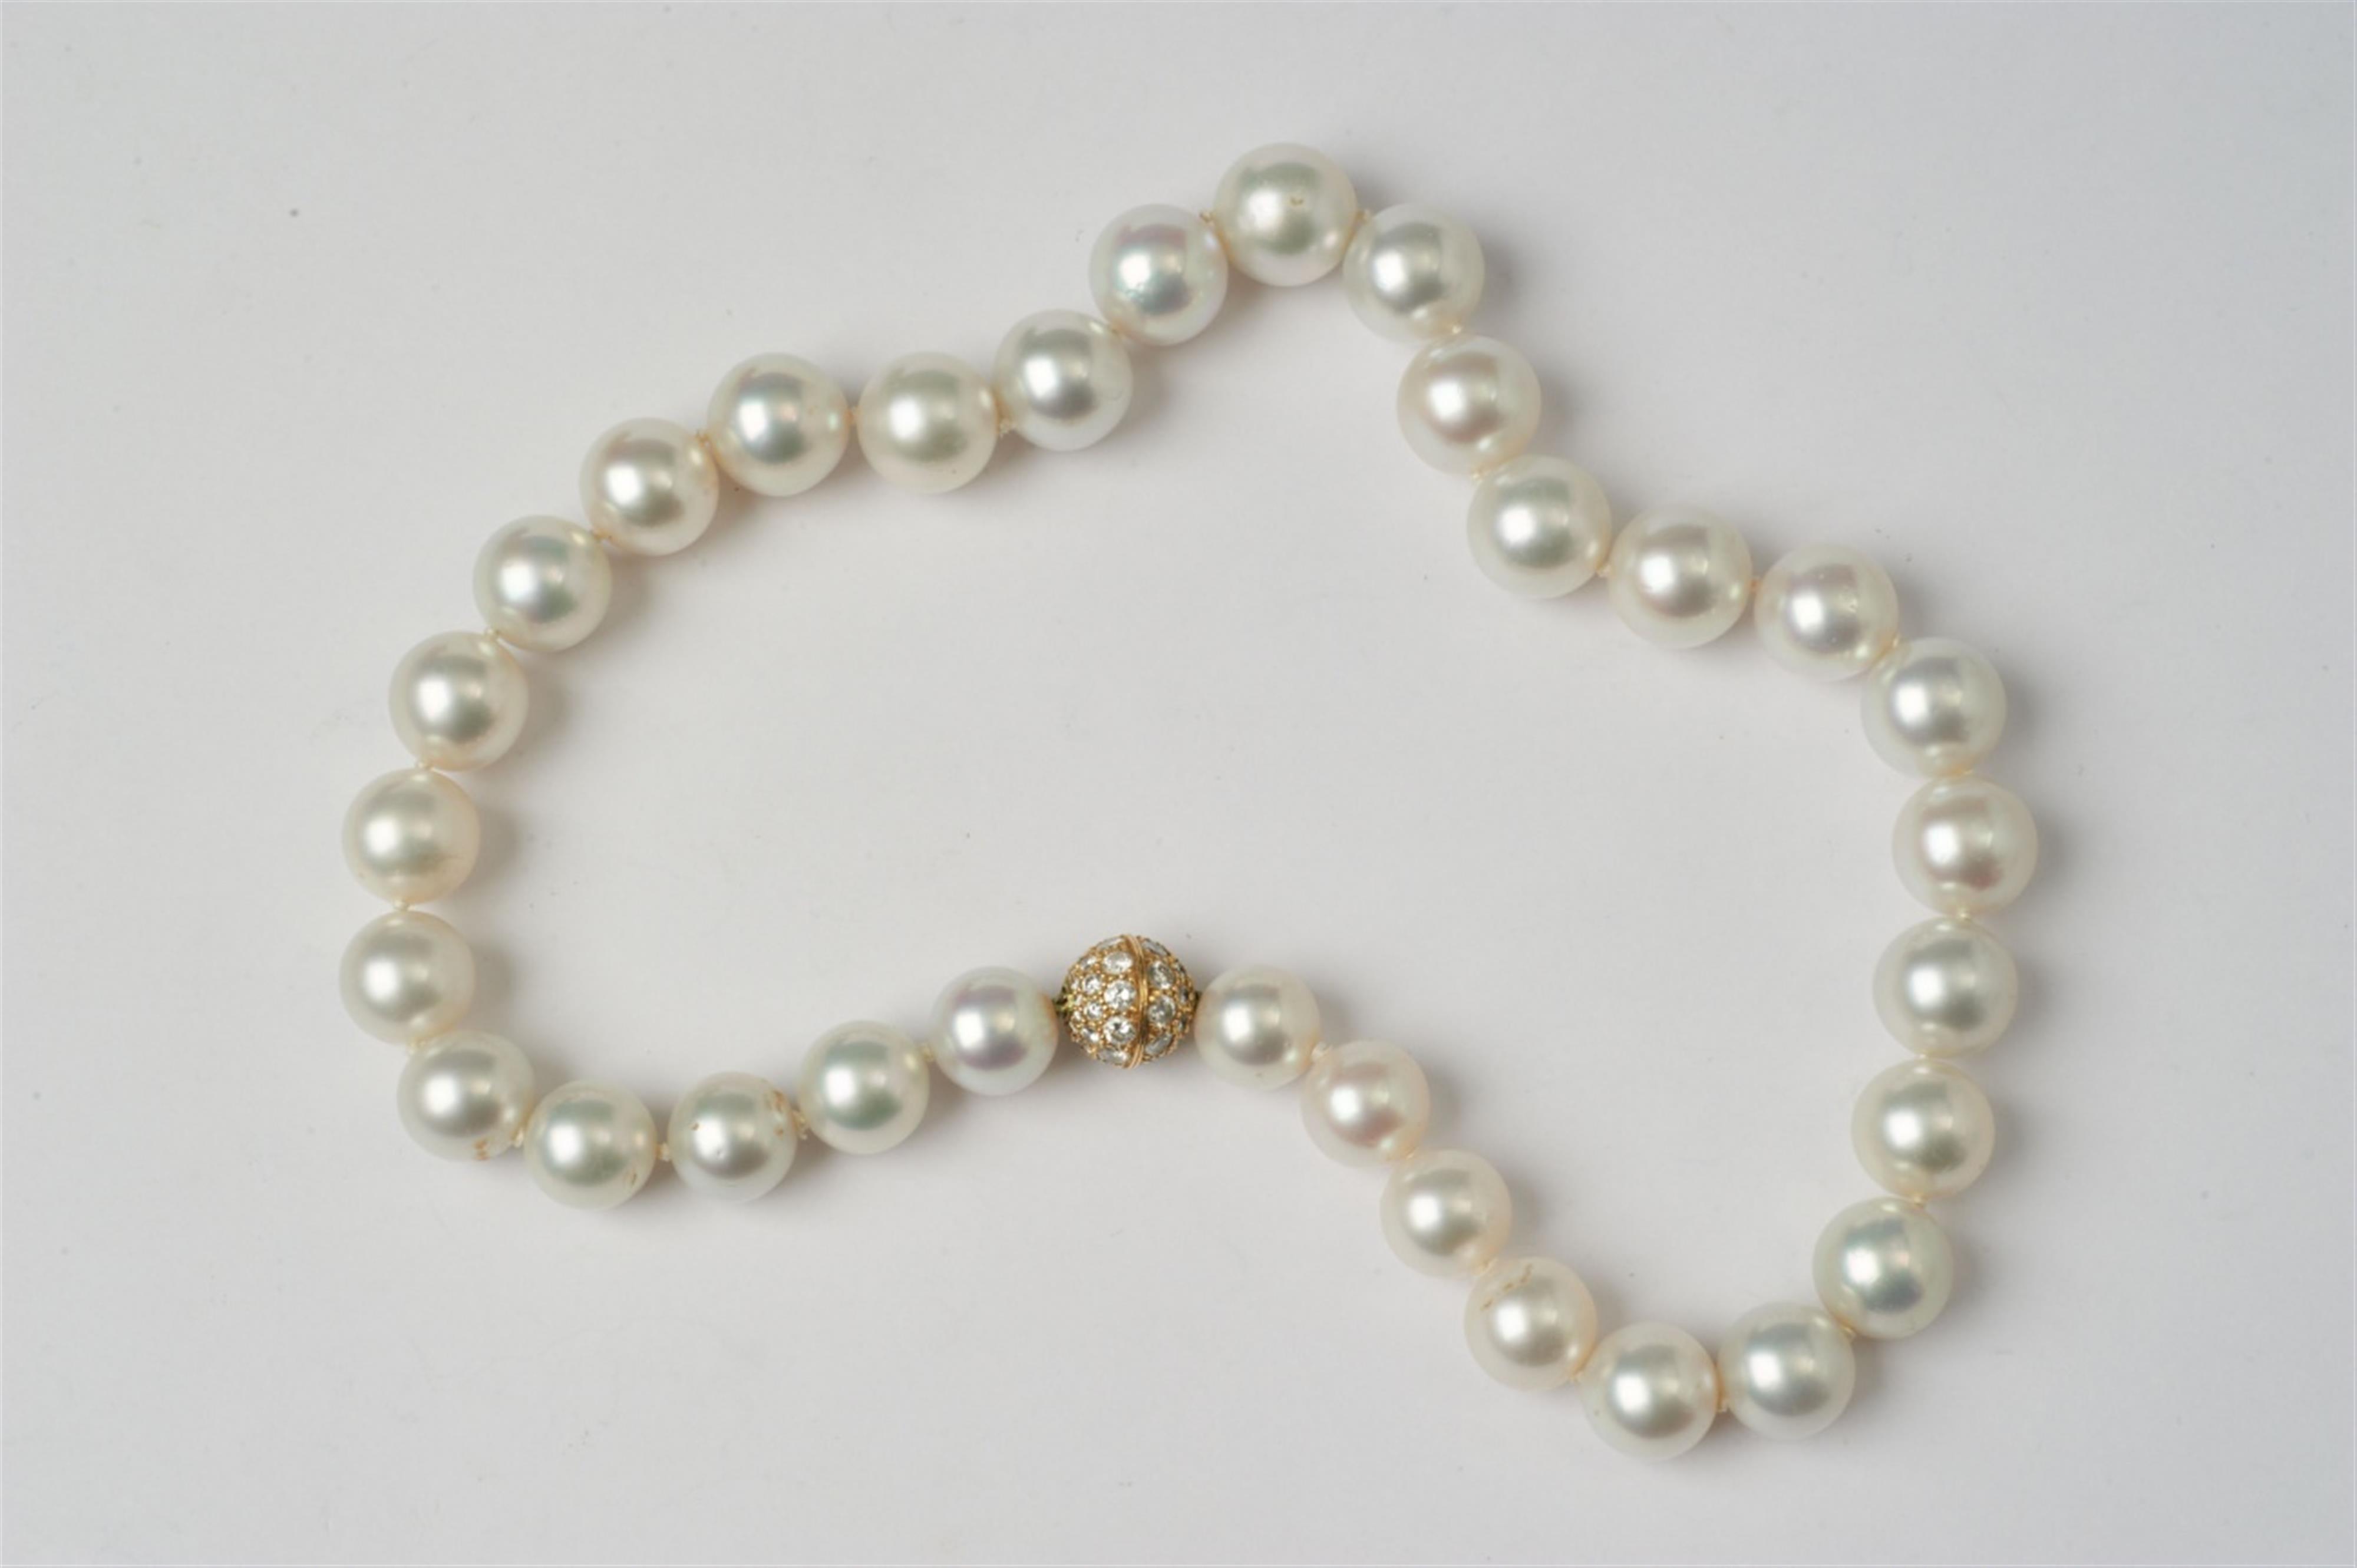 An 18k gold, diamond and South Sea pearl necklace by Hemmerle/Munich - image-1